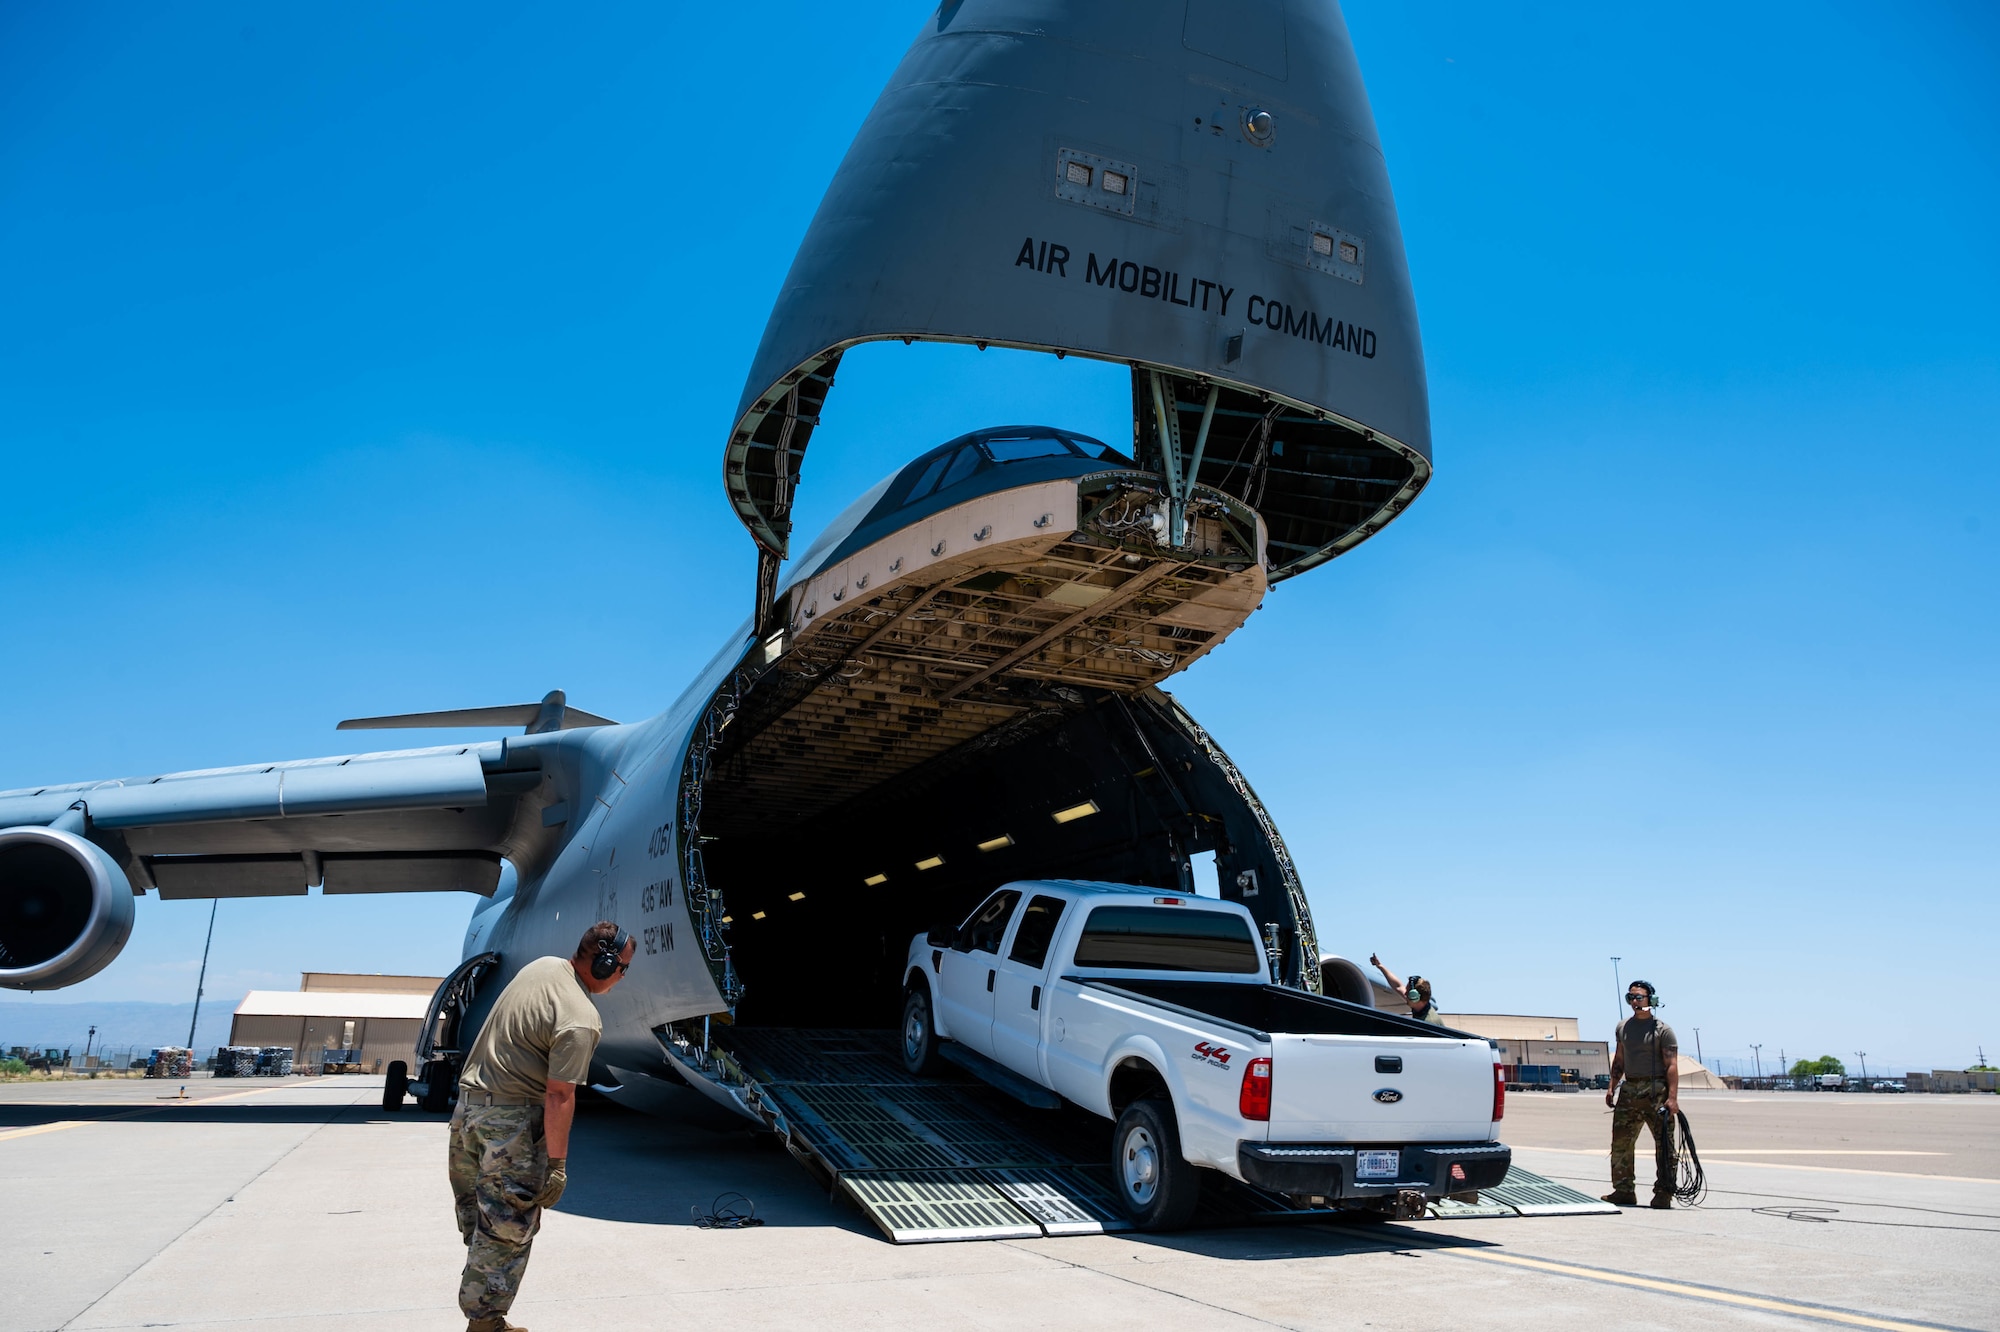 A truck is loaded onto a Dover Air Force Base C-5M Super Galaxy during a Major Command Service Tail Trainer at Holloman AFB, New Mexico, June 7, 2021. The 9th AS performs MSTTs to expedite upgrade and qualification training for C-5M loadmasters and flight engineers. This MSTT was coordinated in partnership with Air Education Training Command’s 49th Wing and Air Force Materiel Command’s 635th Materiel Maintenance Group. (U.S. Air Force photo by Senior Airman Faith Schaefer)